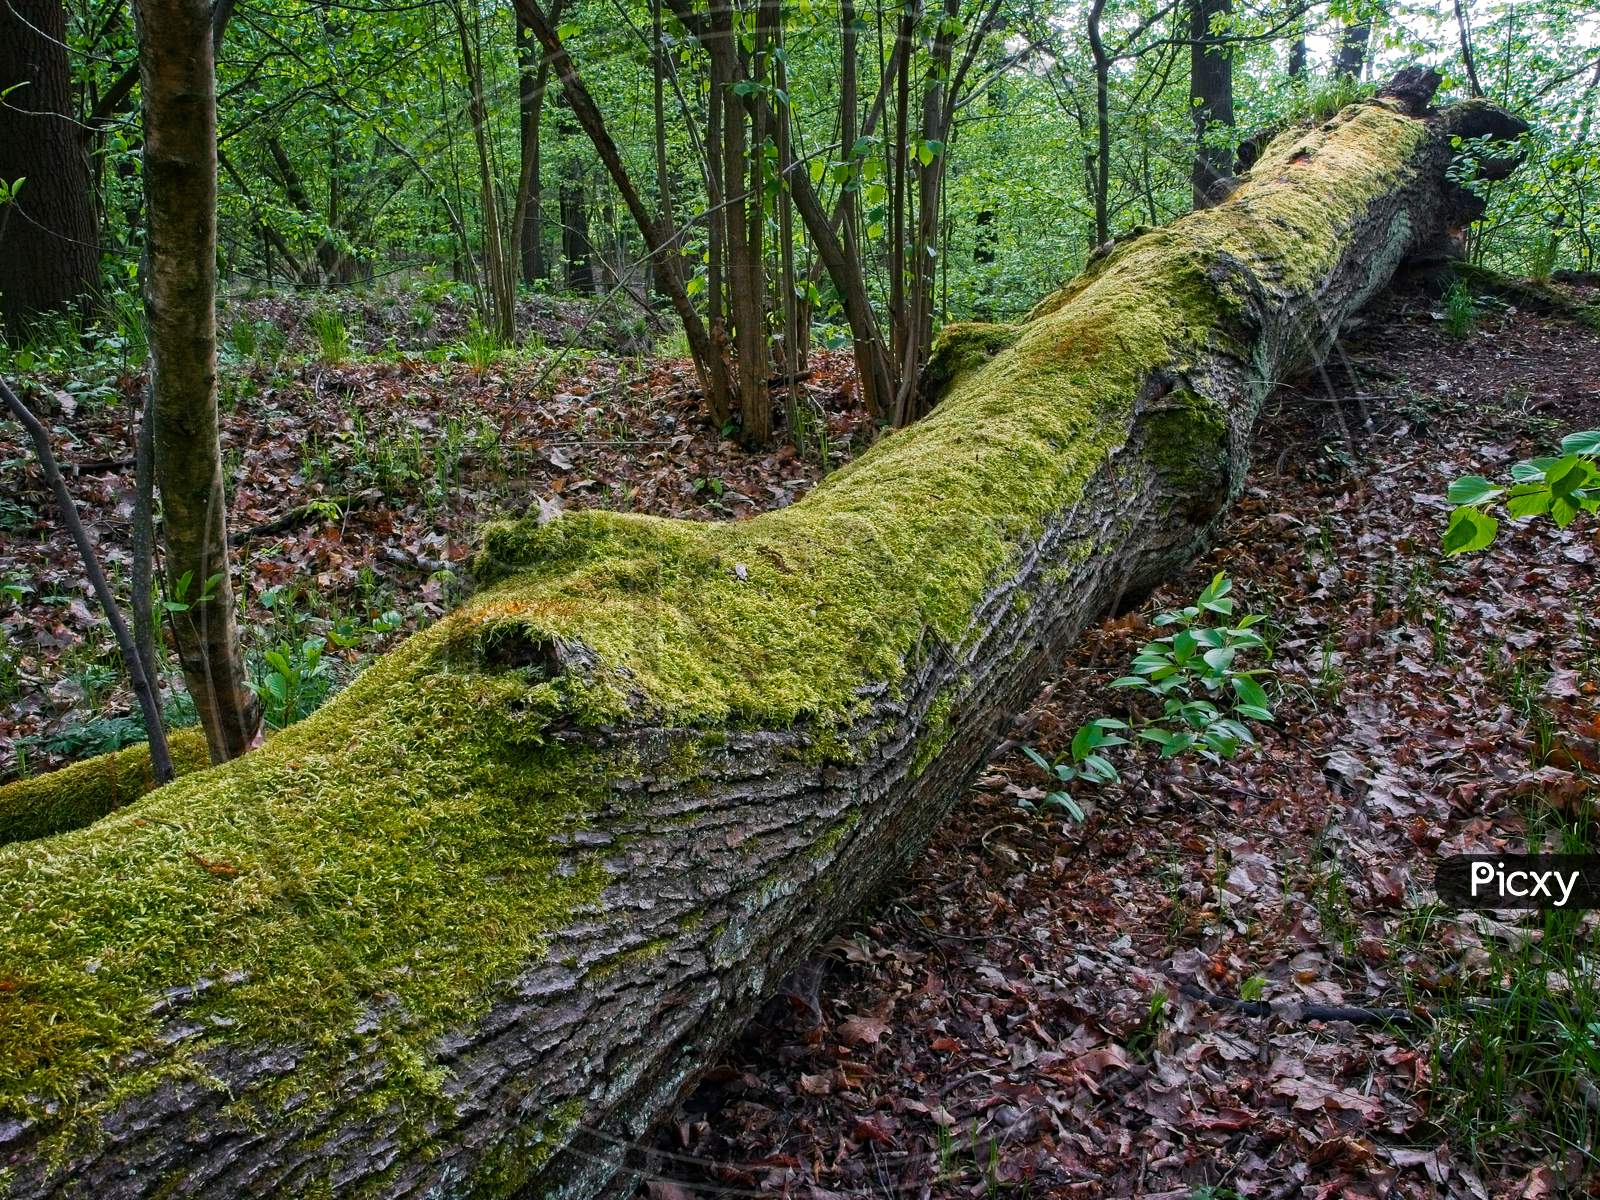 Moss Growing On The Fallen Tree In The European Forest.